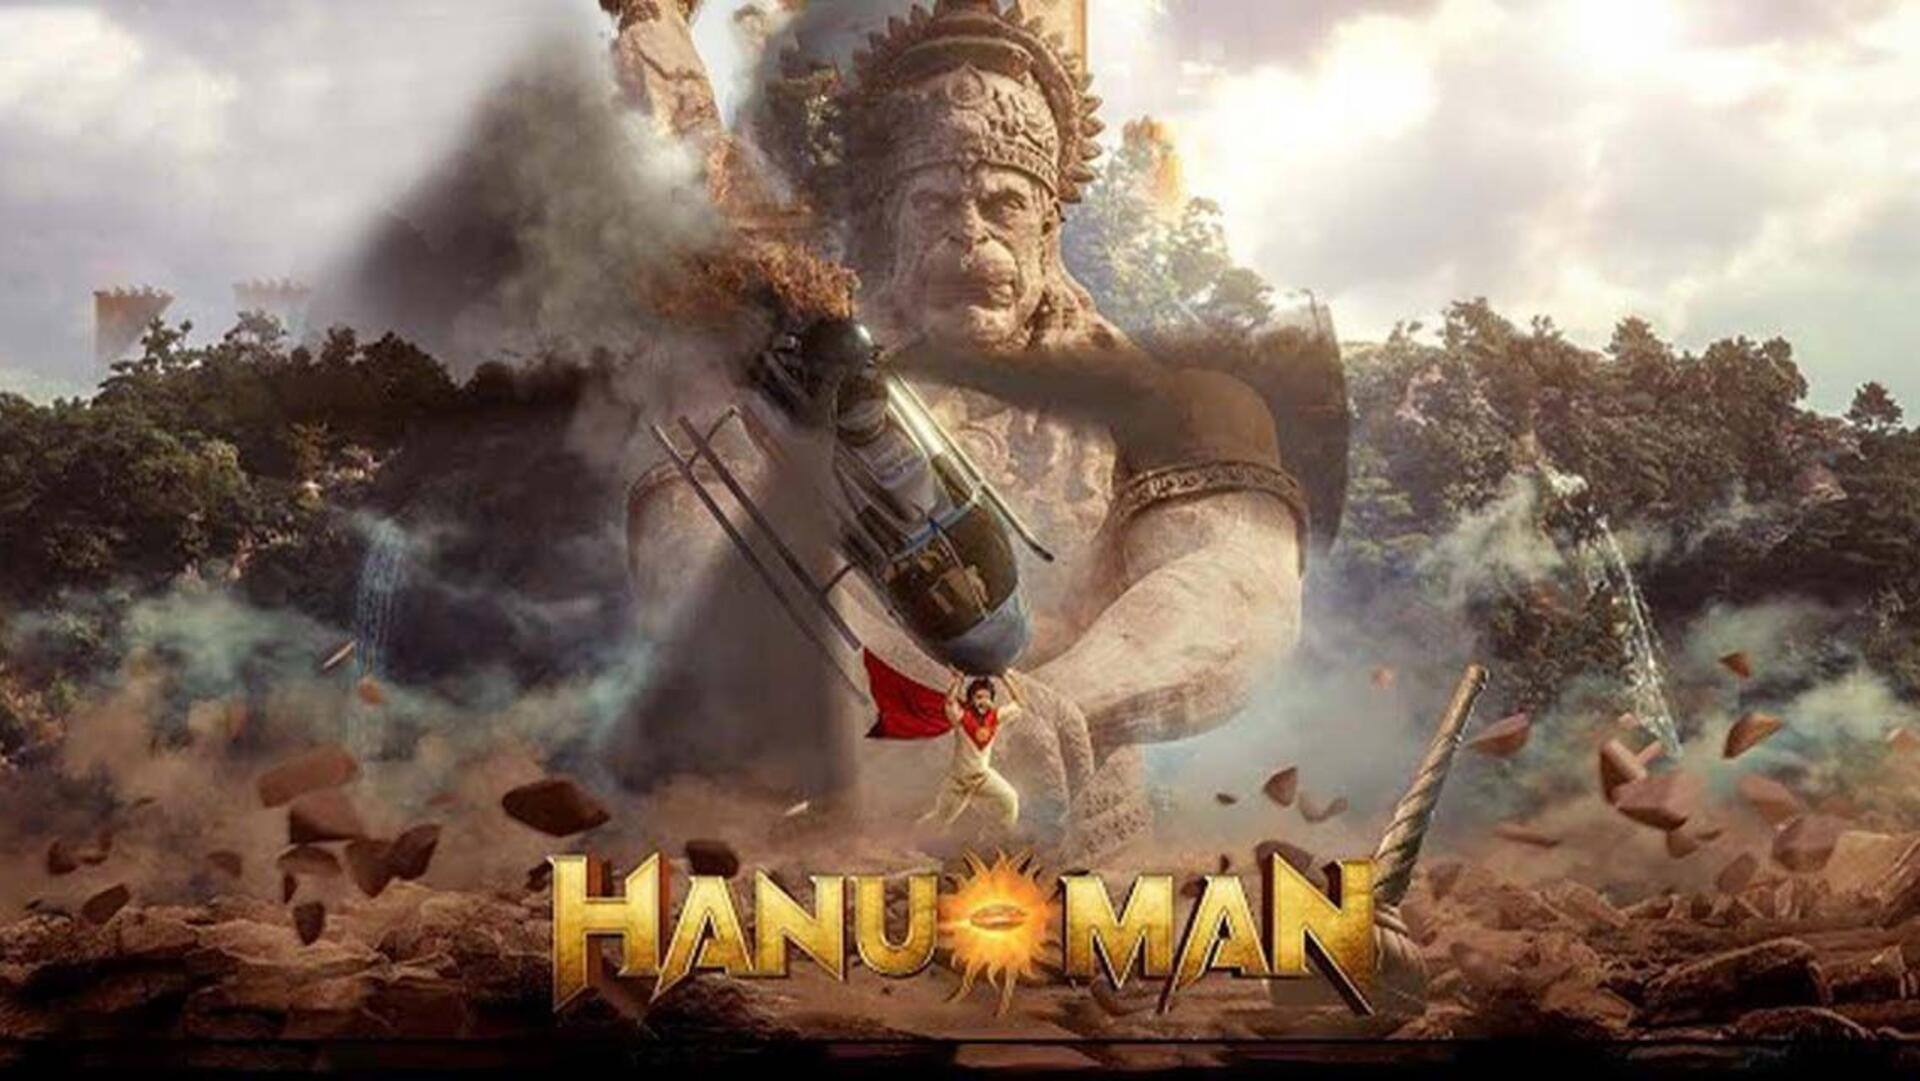 Box office collection: 'Hanu-Man' is stable on fourth week